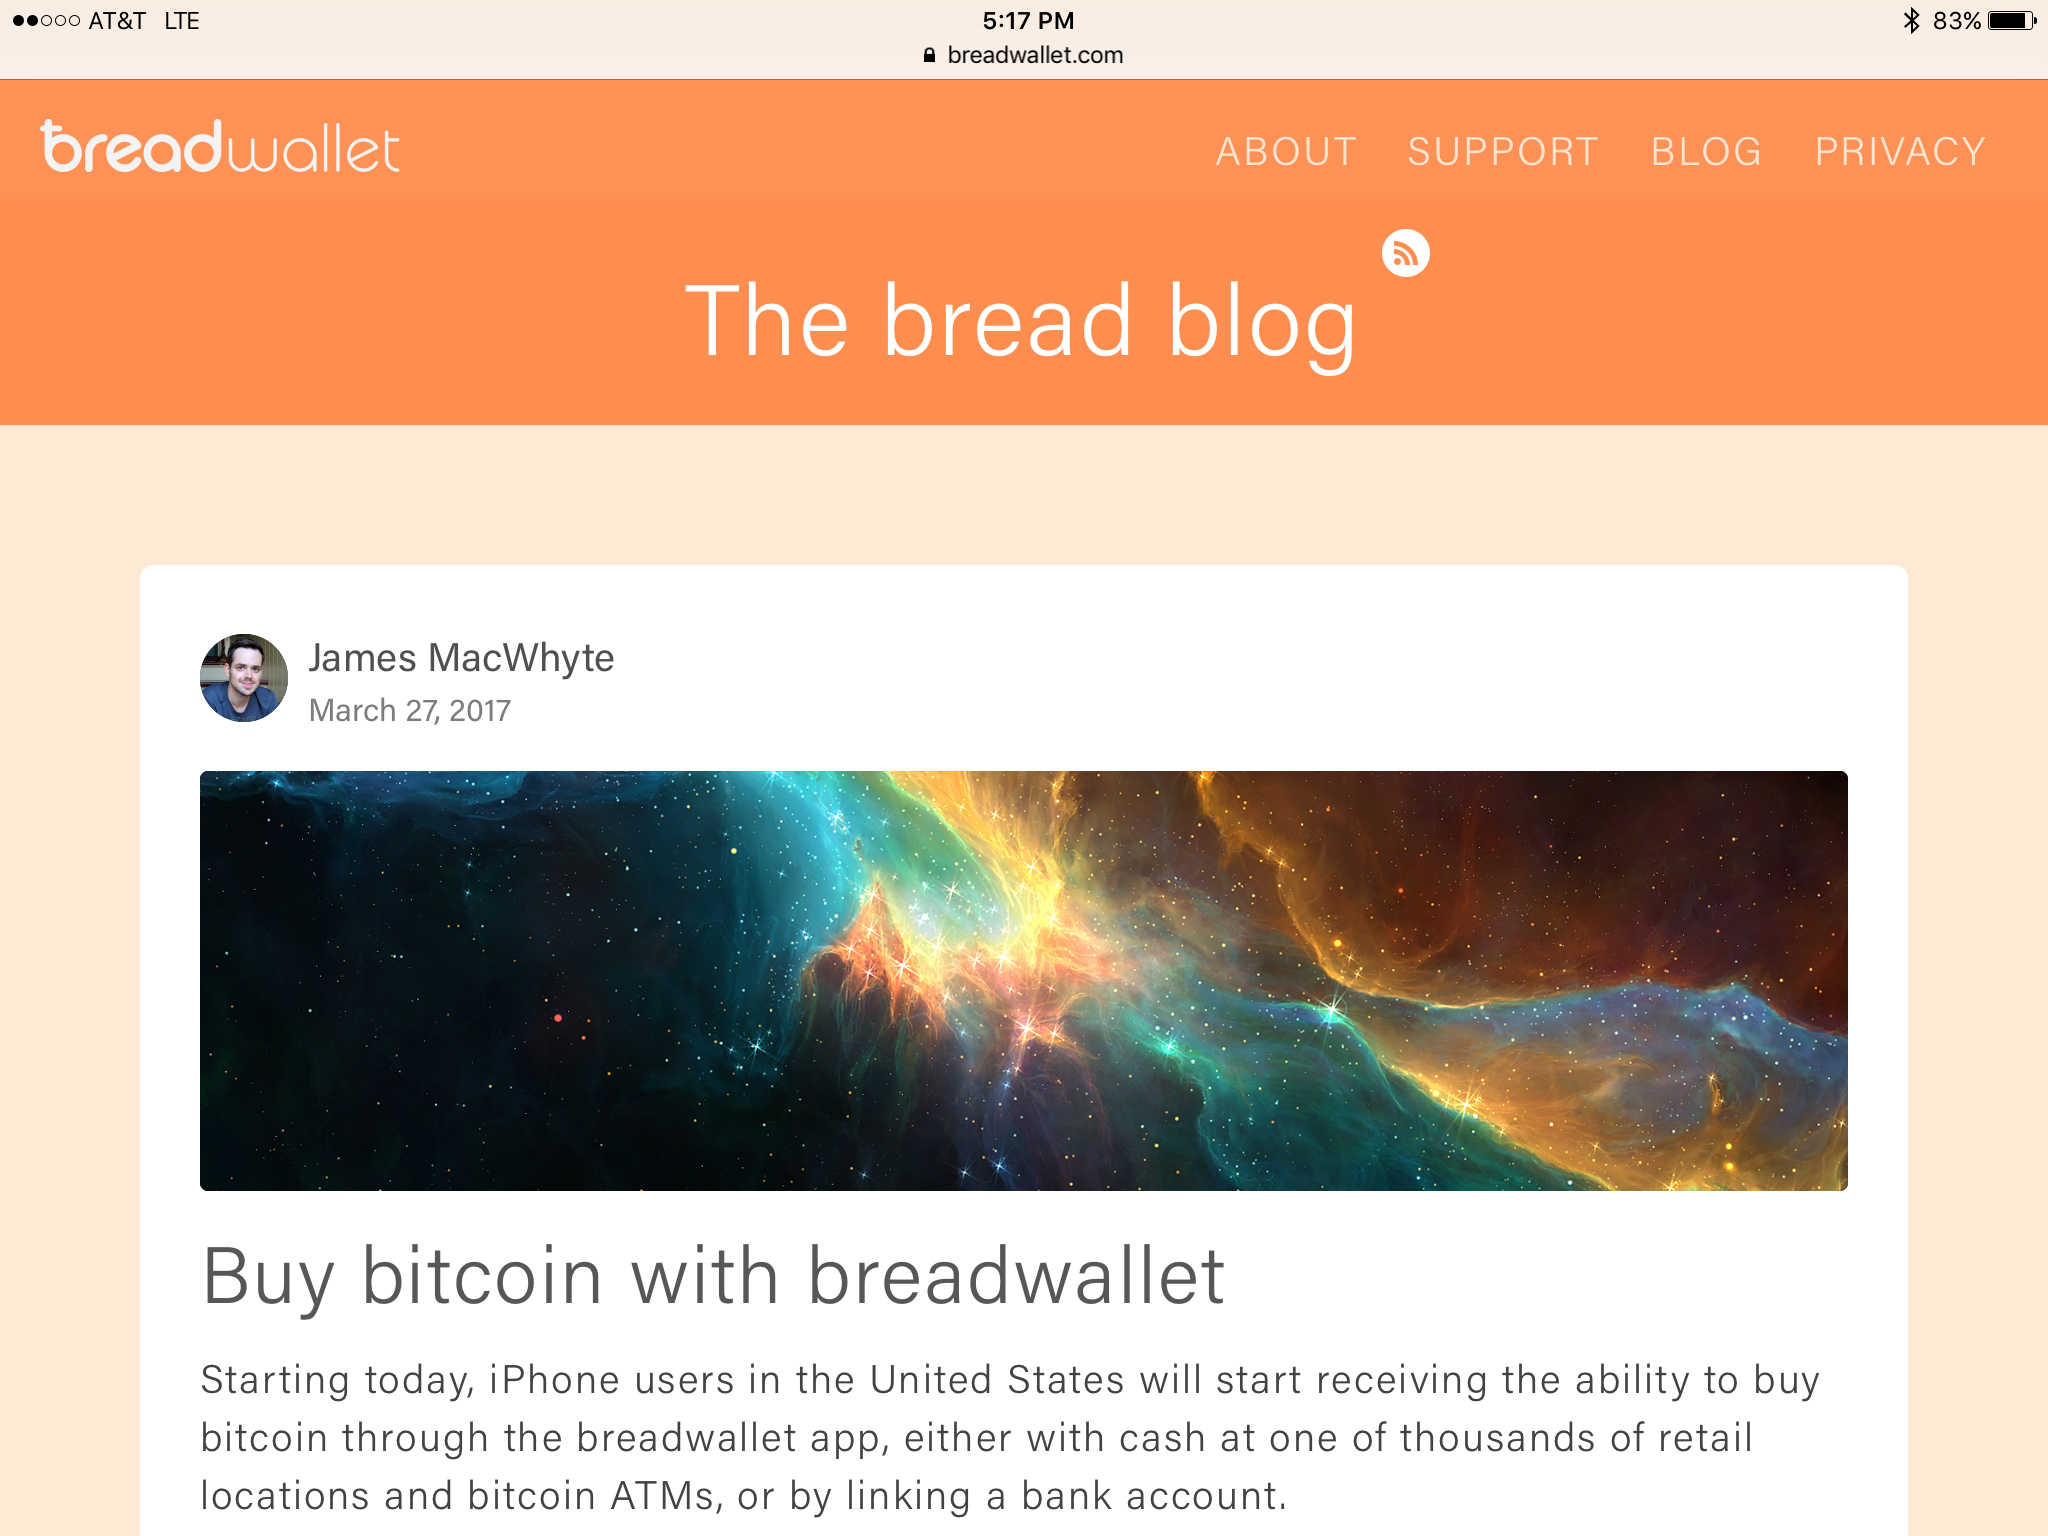 how do i buy bitcoin with breadwallet in new york